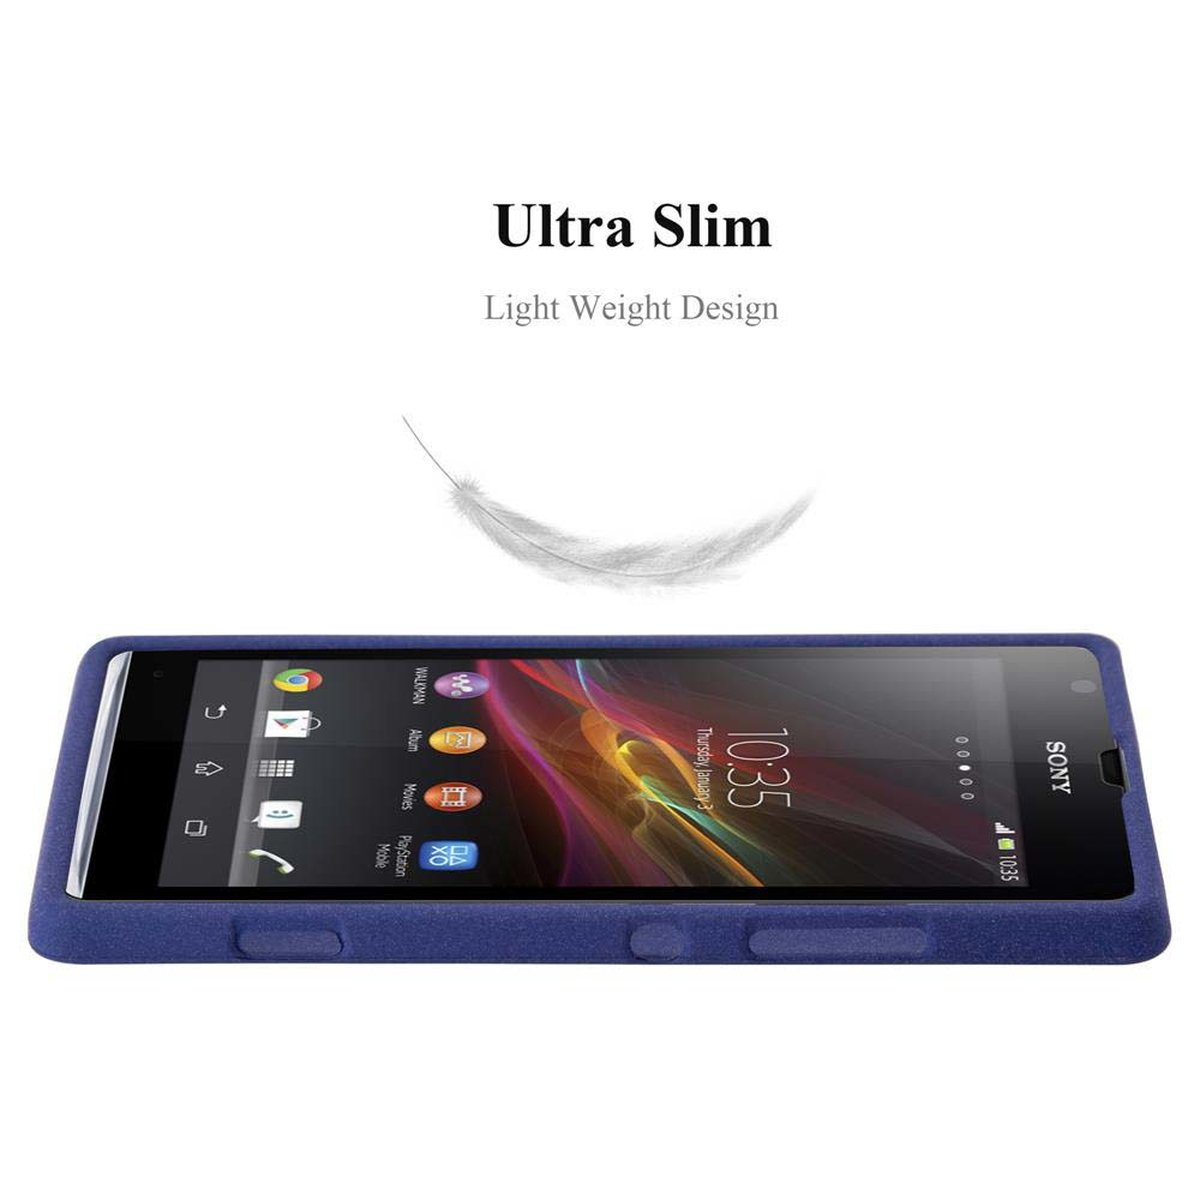 TPU Sony, Schutzhülle, Xperia SP, DUNKEL BLAU Frosted CADORABO FROST Backcover,